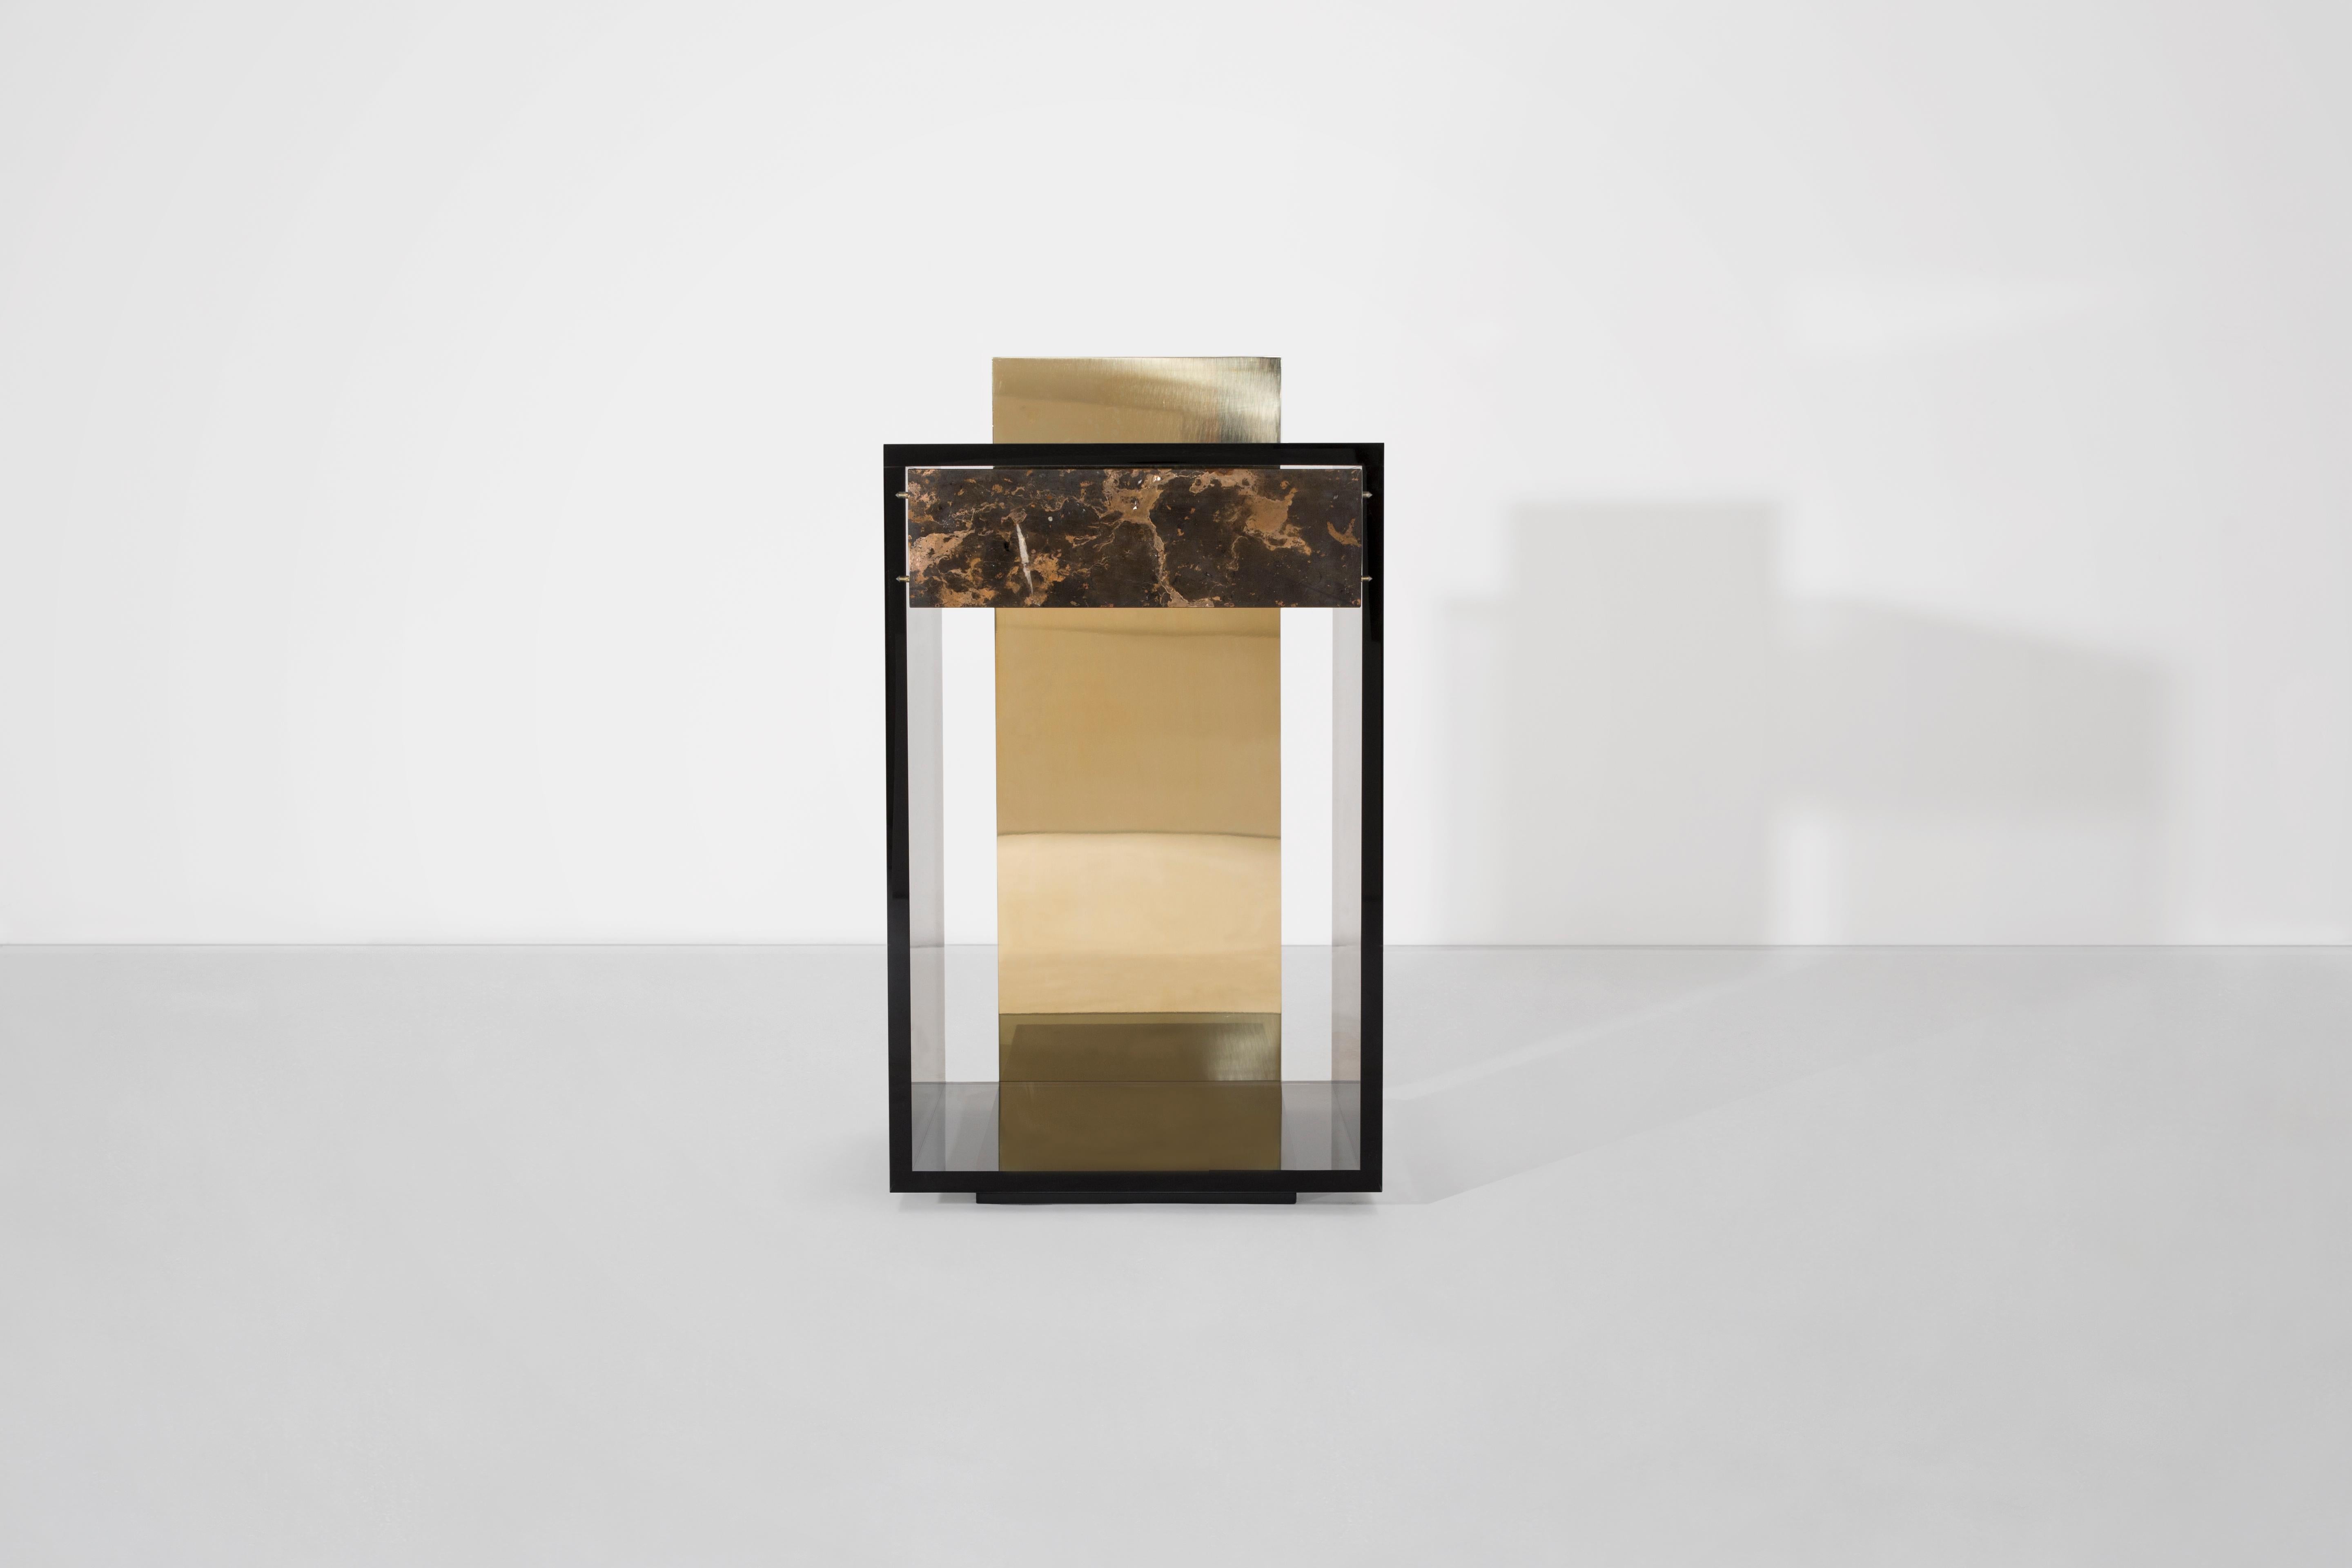 An abstracted icon that has wiped its traces, the slant is pure, saturated presence. Despite its elegant shape, it is heavy enough to withstand any change of time and weather. The marble’s mature vanity is held by a transparent acrylic frame and a